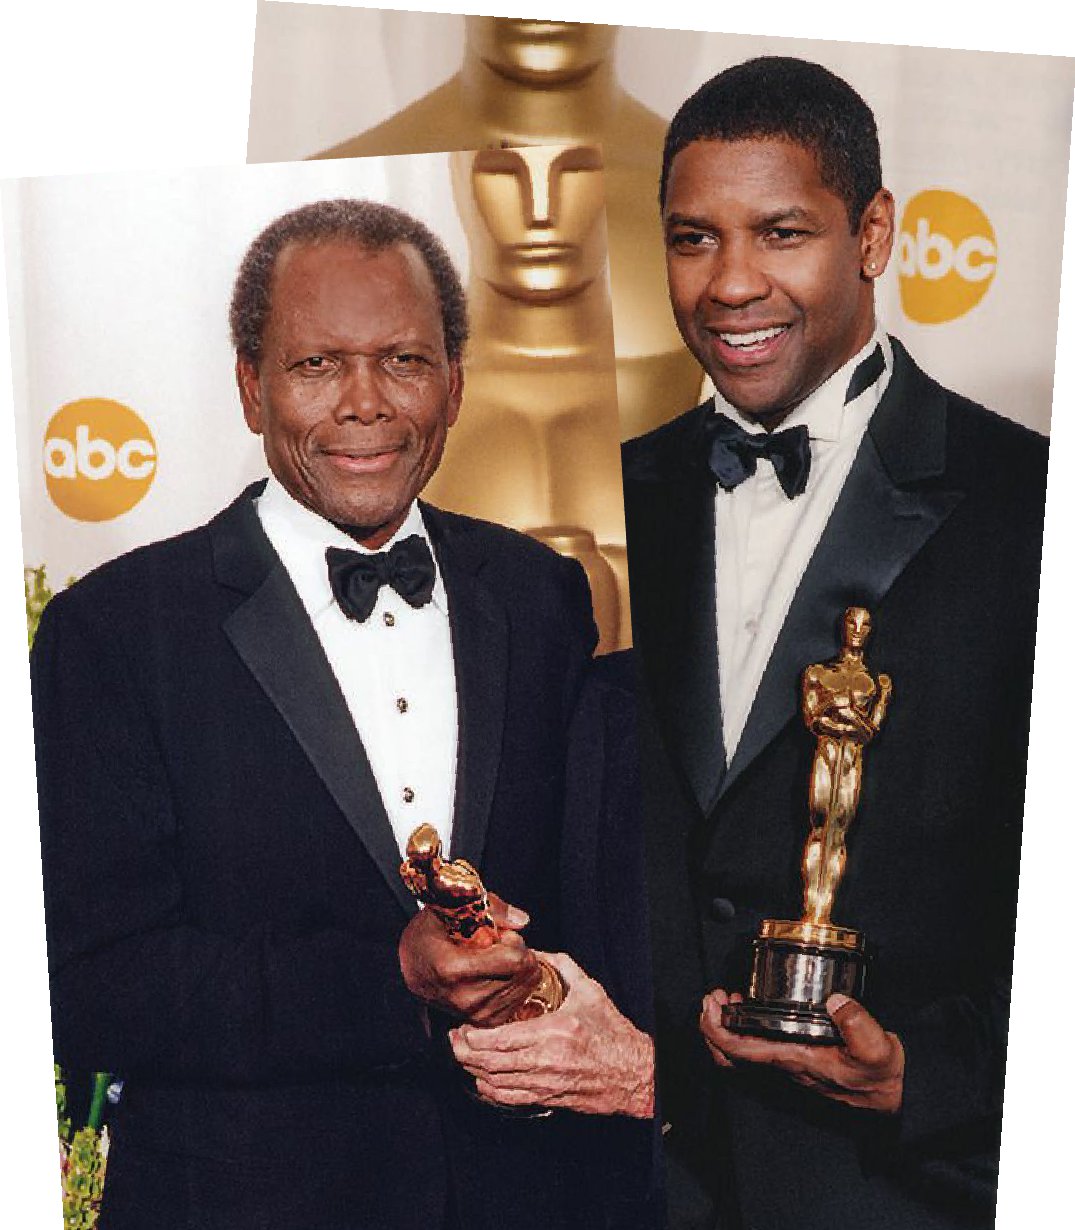 Best Actor winner Denzel Washington of Training Day and 2002 Honorary Award winner Sidney Poitier. PHOTO COURTESY OF A.M.P.A.S.